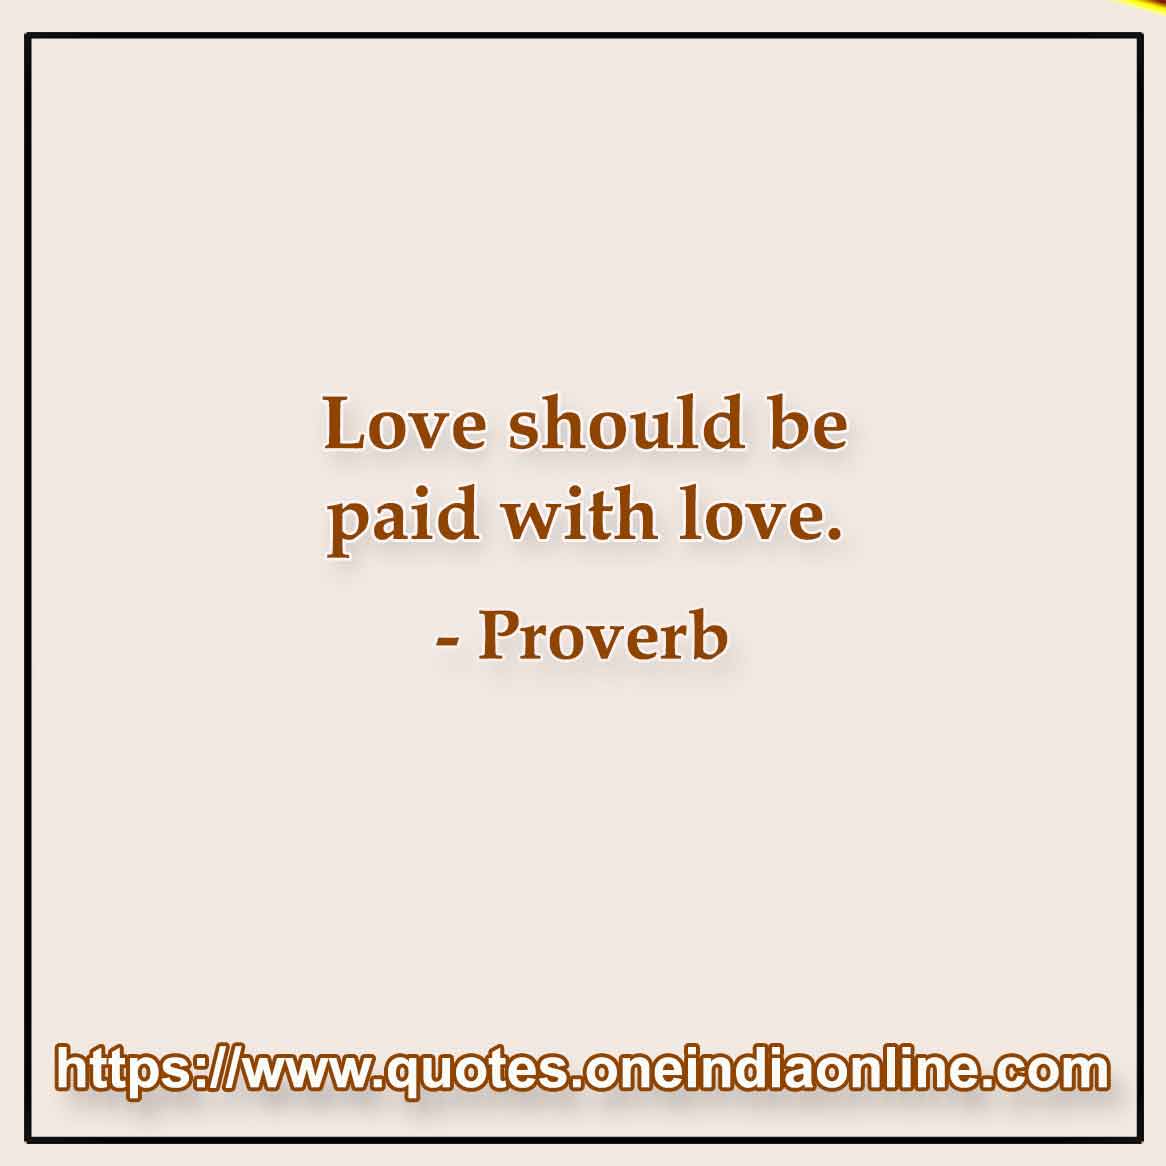 Love should be paid with love.

Portuguese Proverbs